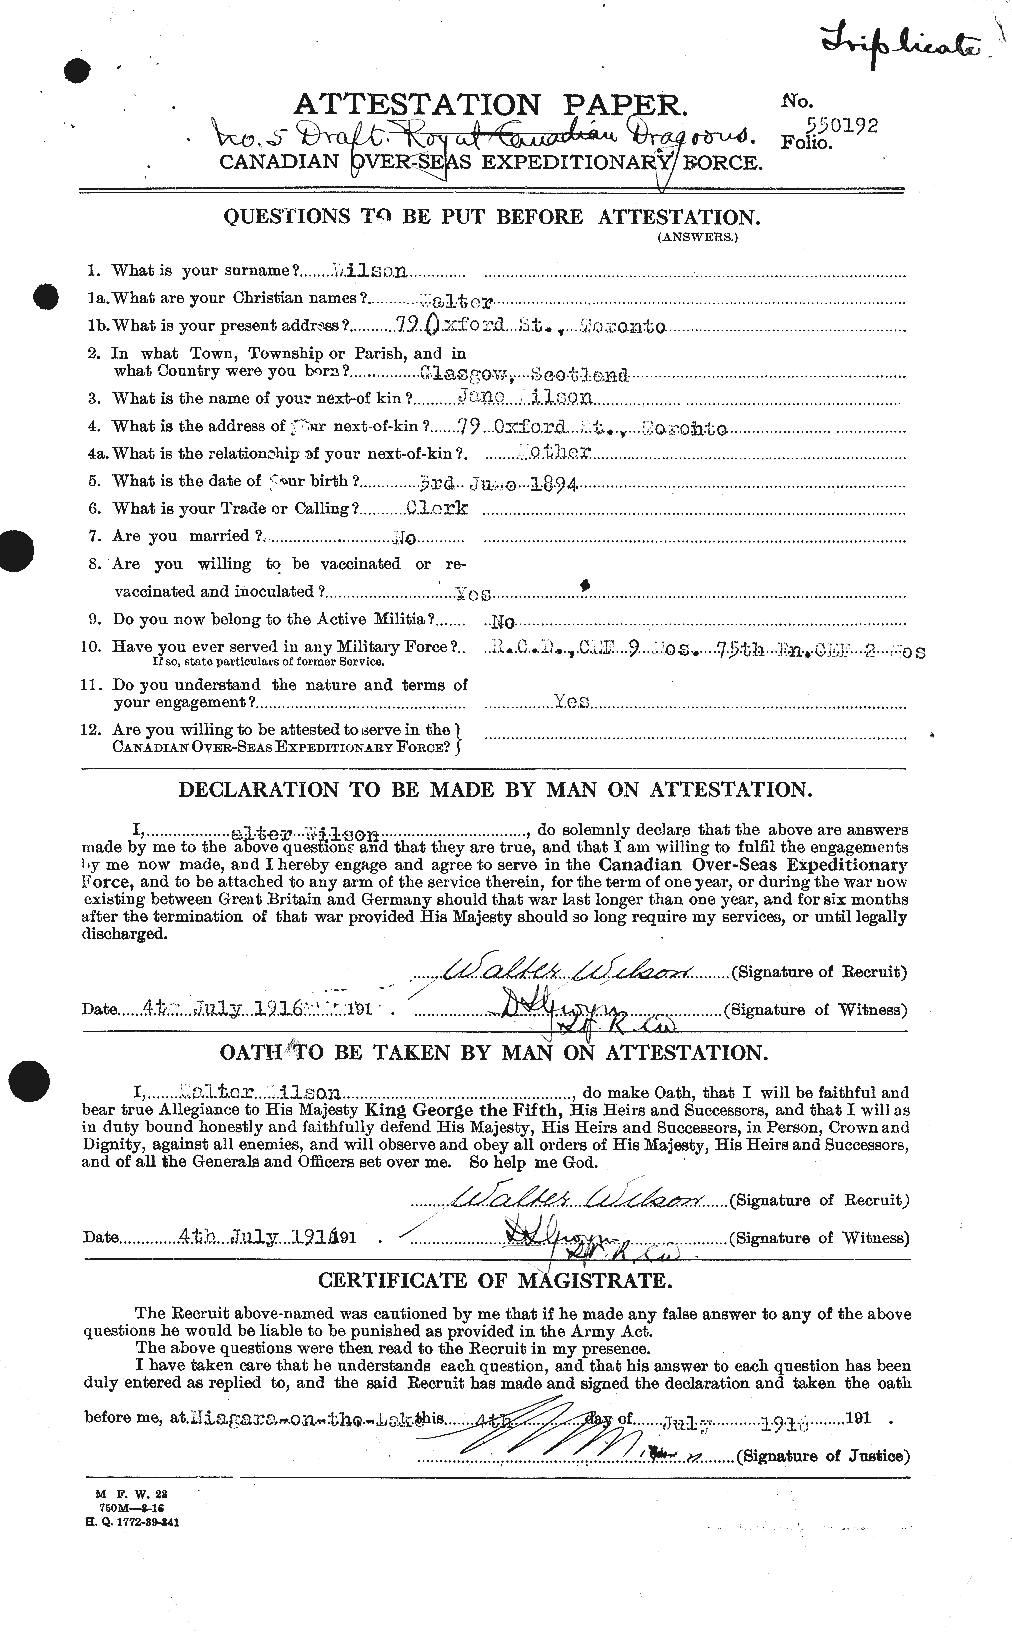 Personnel Records of the First World War - CEF 681741a